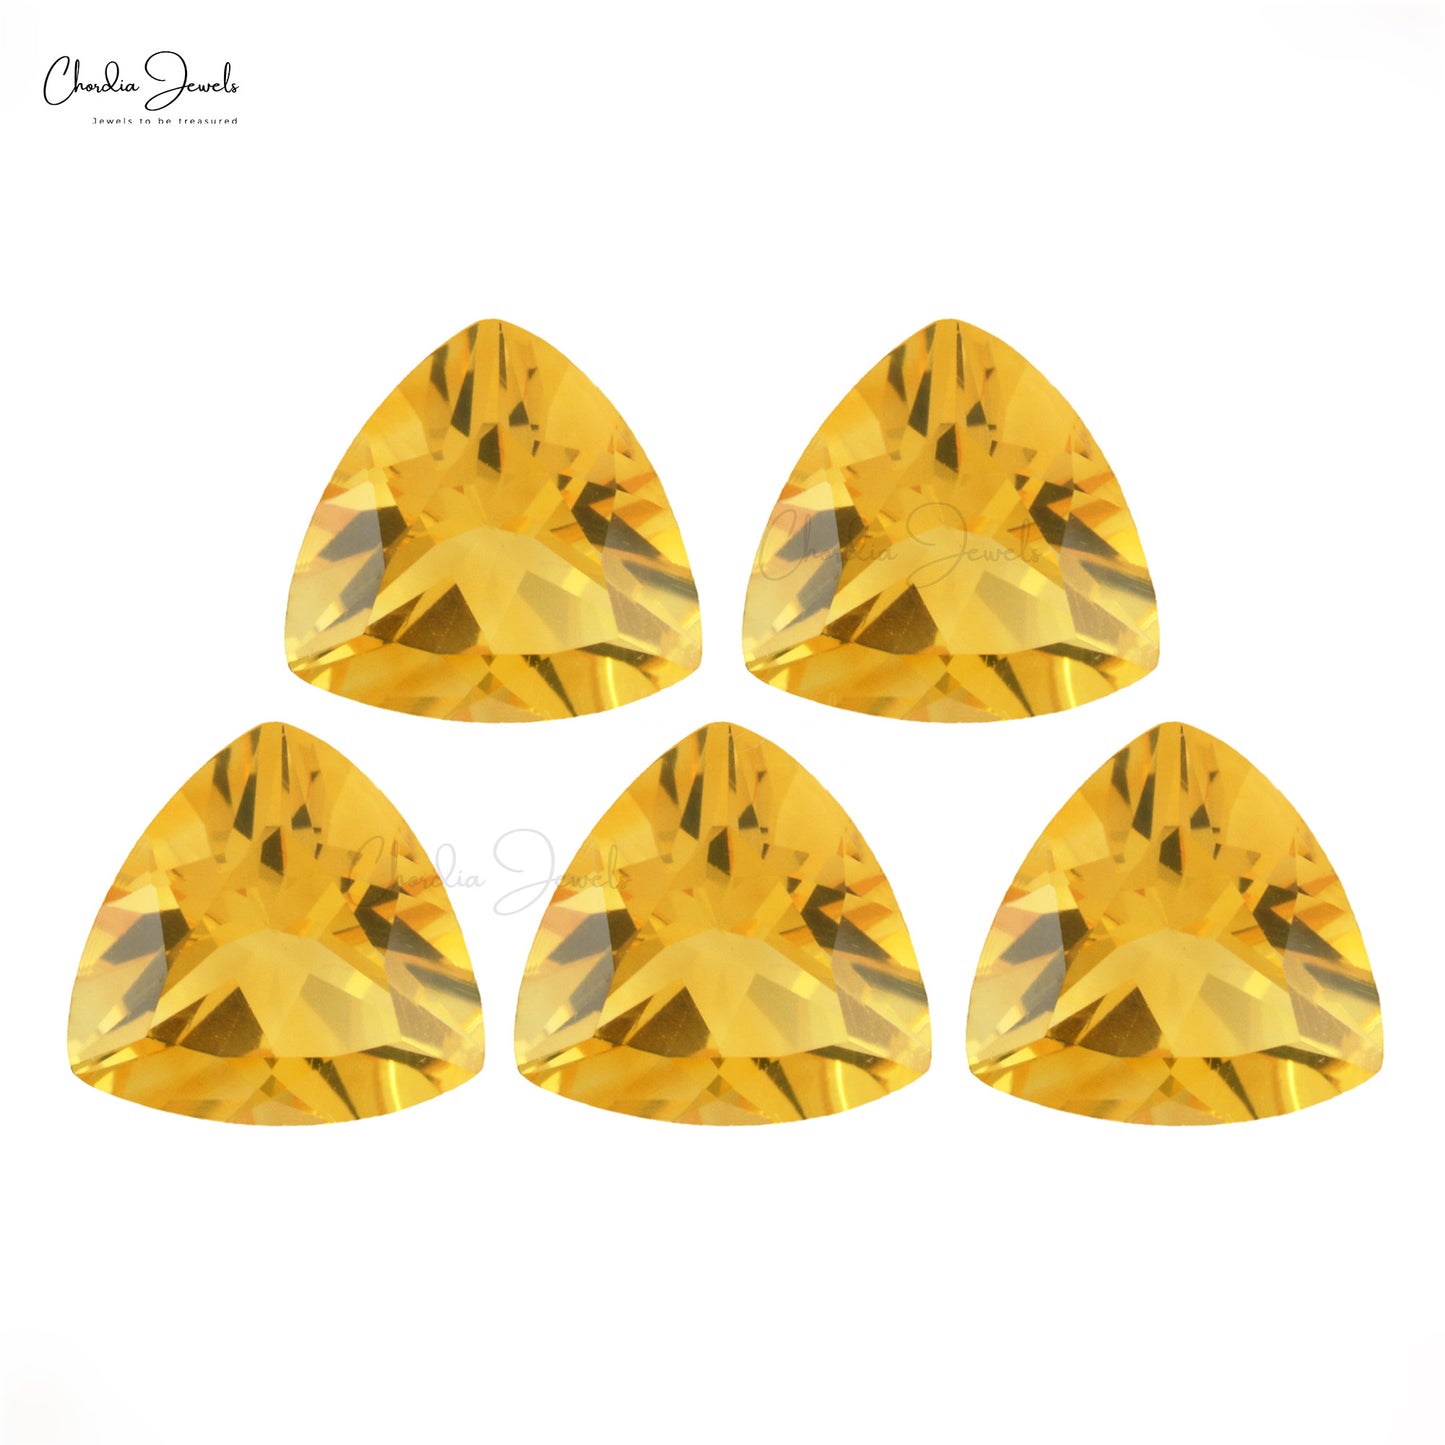 Load image into Gallery viewer, High Grade 15MM Trillion Cut Citrine for Makings Necklaces, 1 Piece
